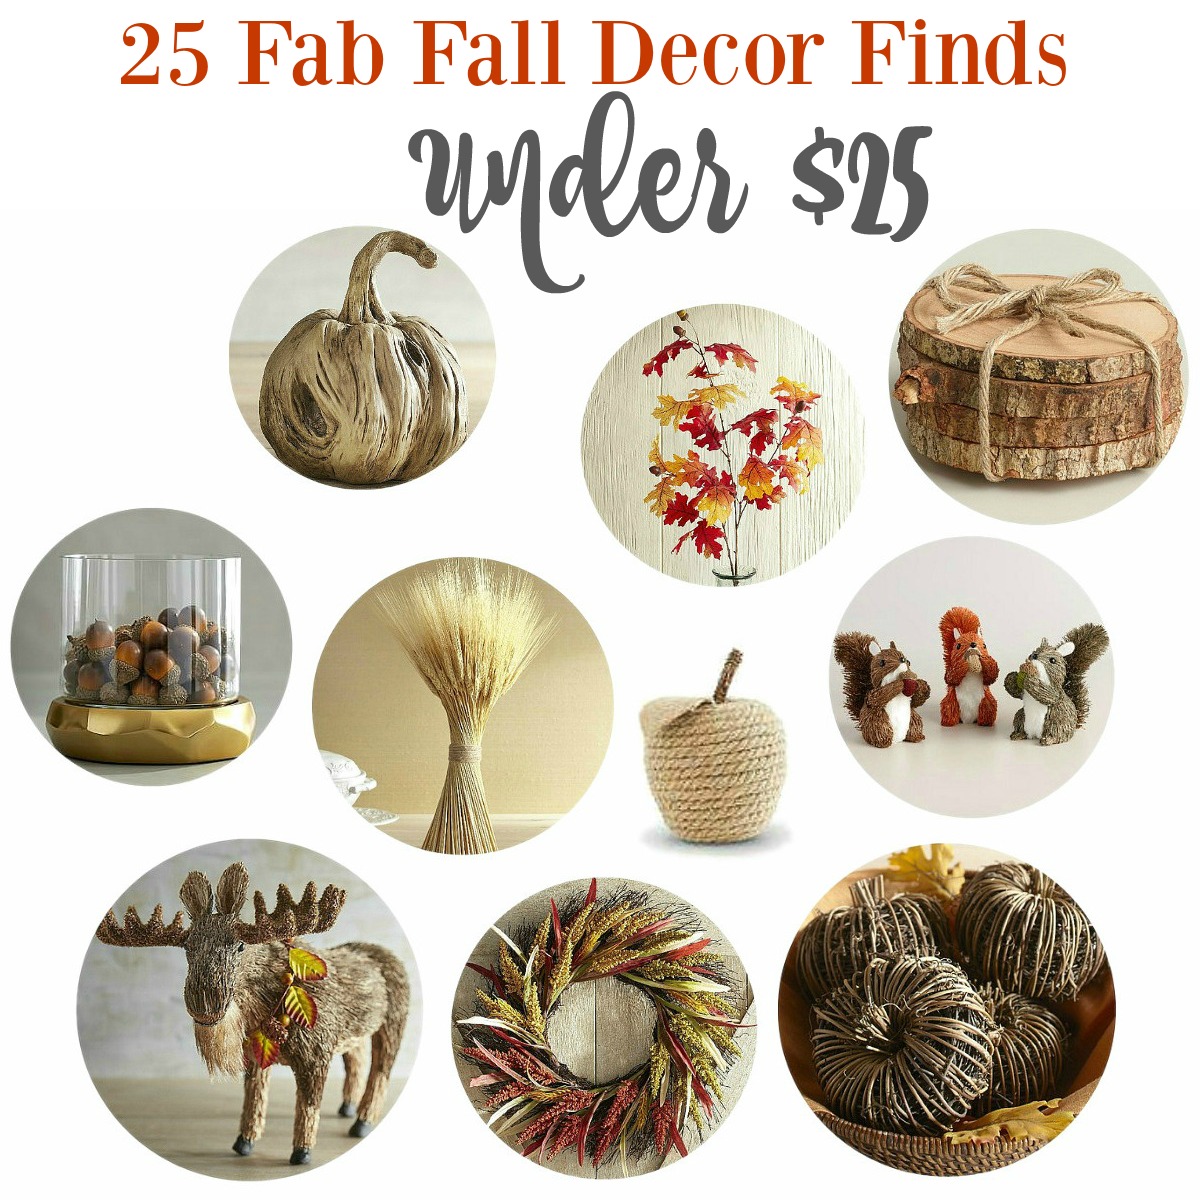 25-fab-fall-decor-finds-youll-love-for-under-25